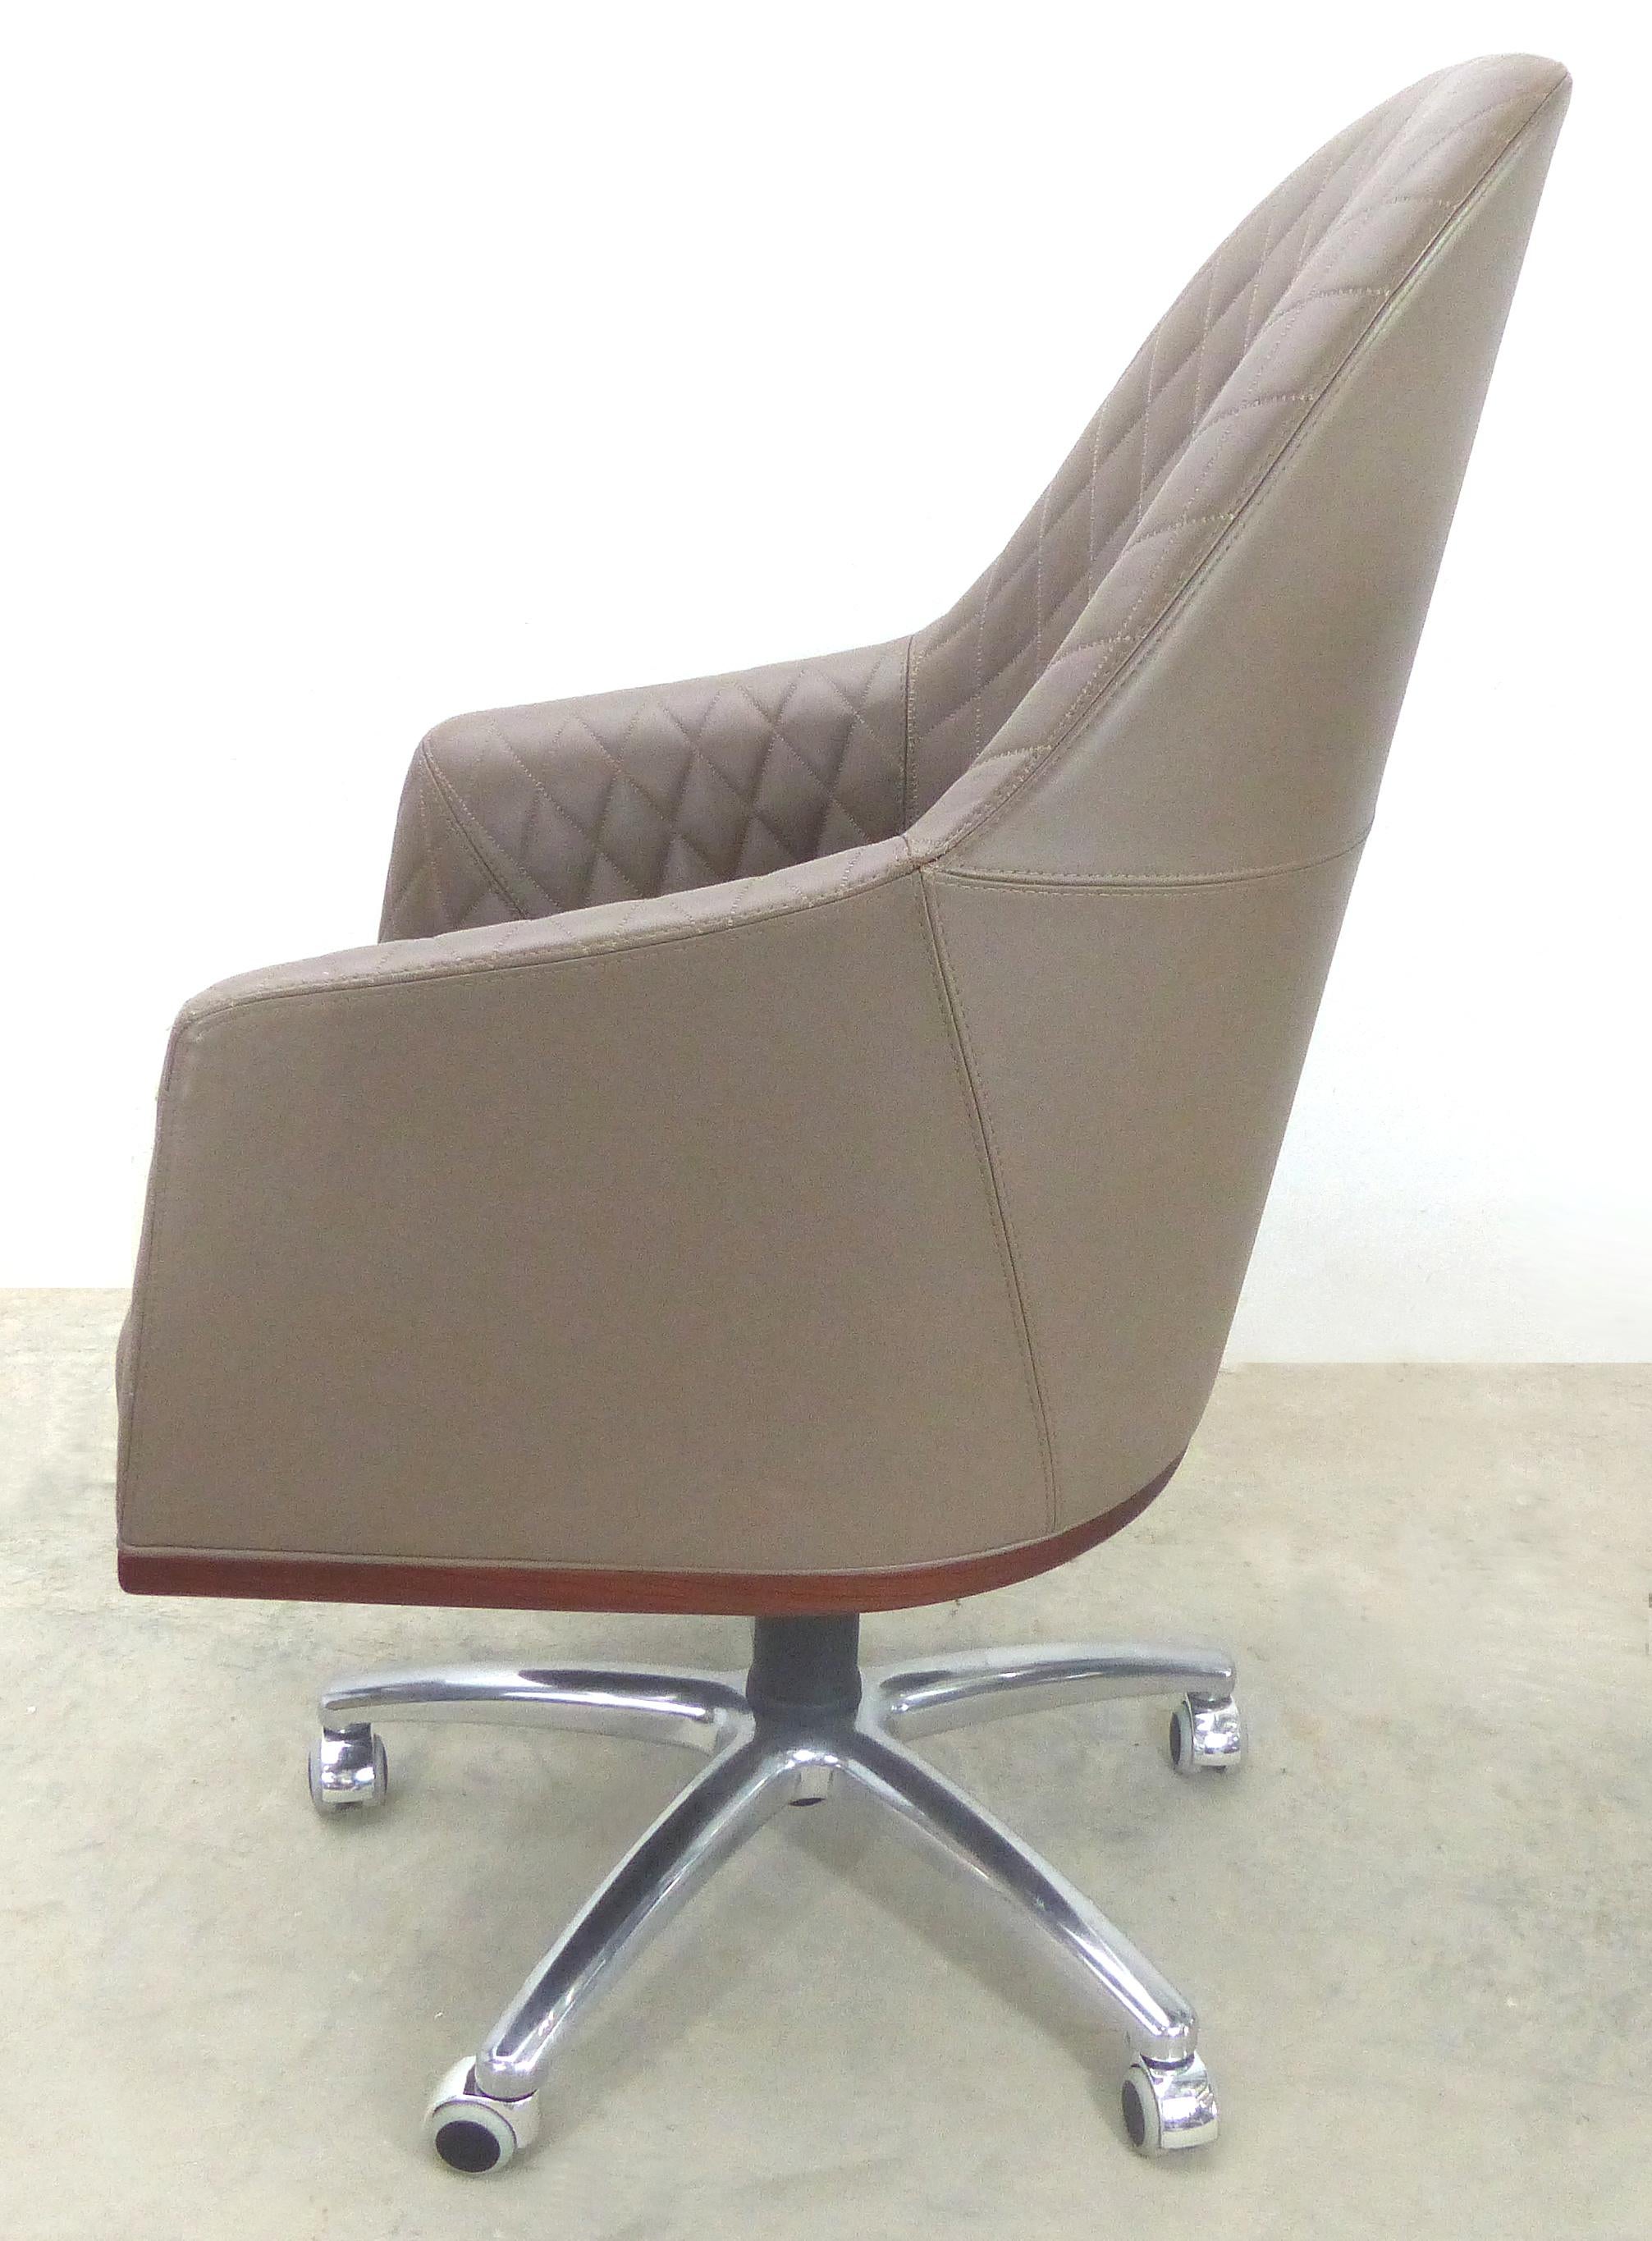 Italian Leather Swivel Desk Chair by Umberto Asnago for Medea Mobiledia, Italy